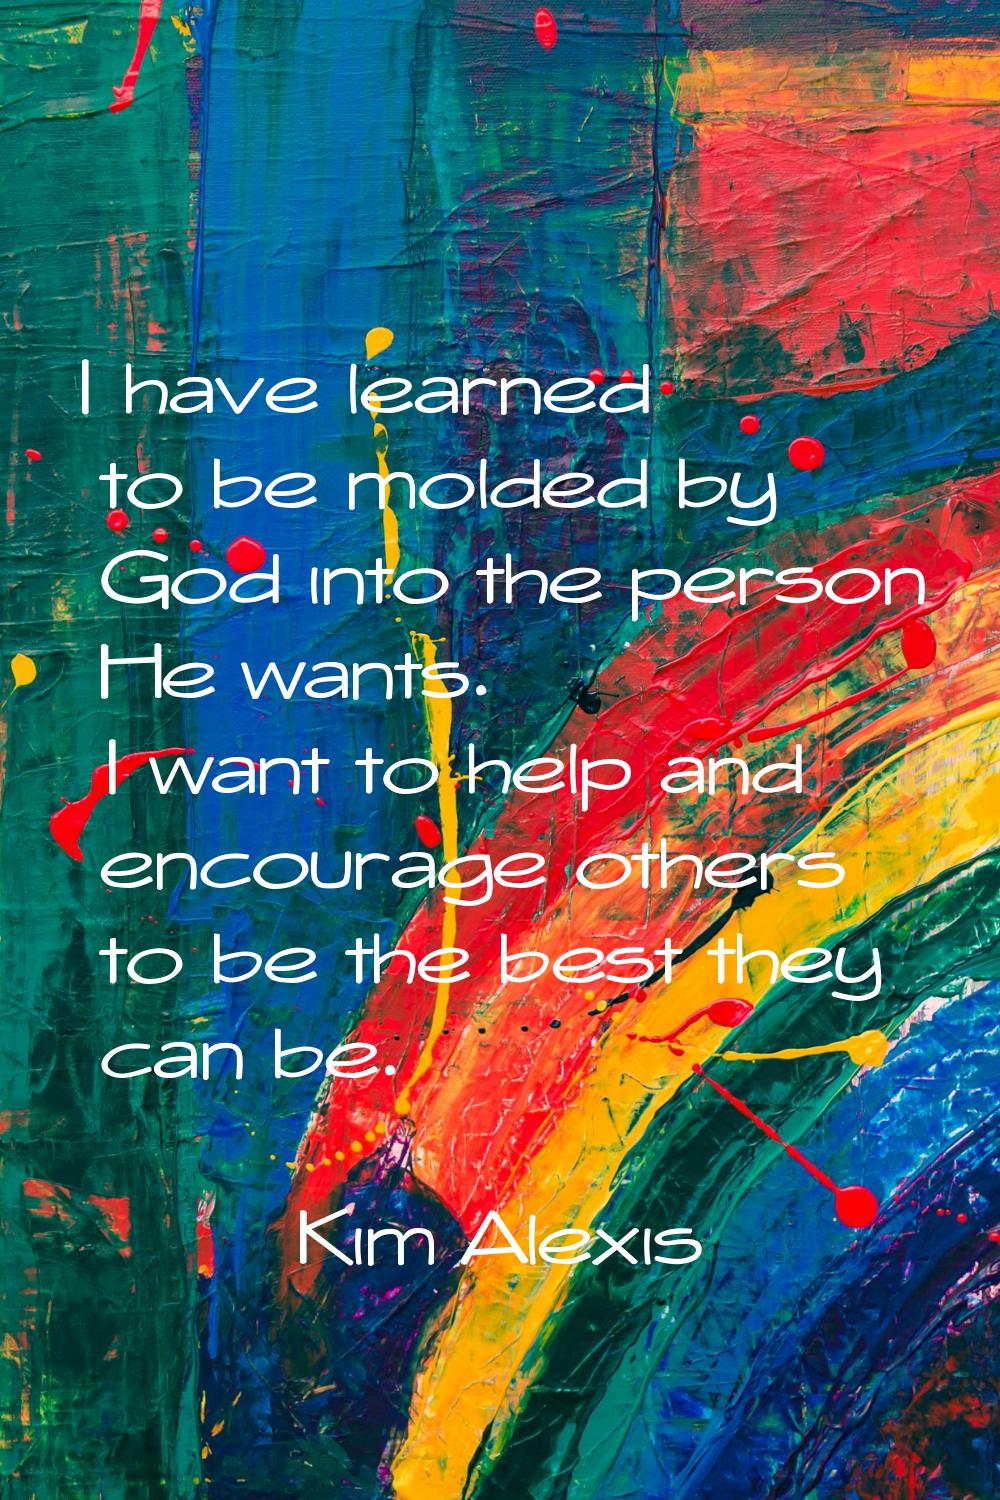 I have learned to be molded by God into the person He wants. I want to help and encourage others to